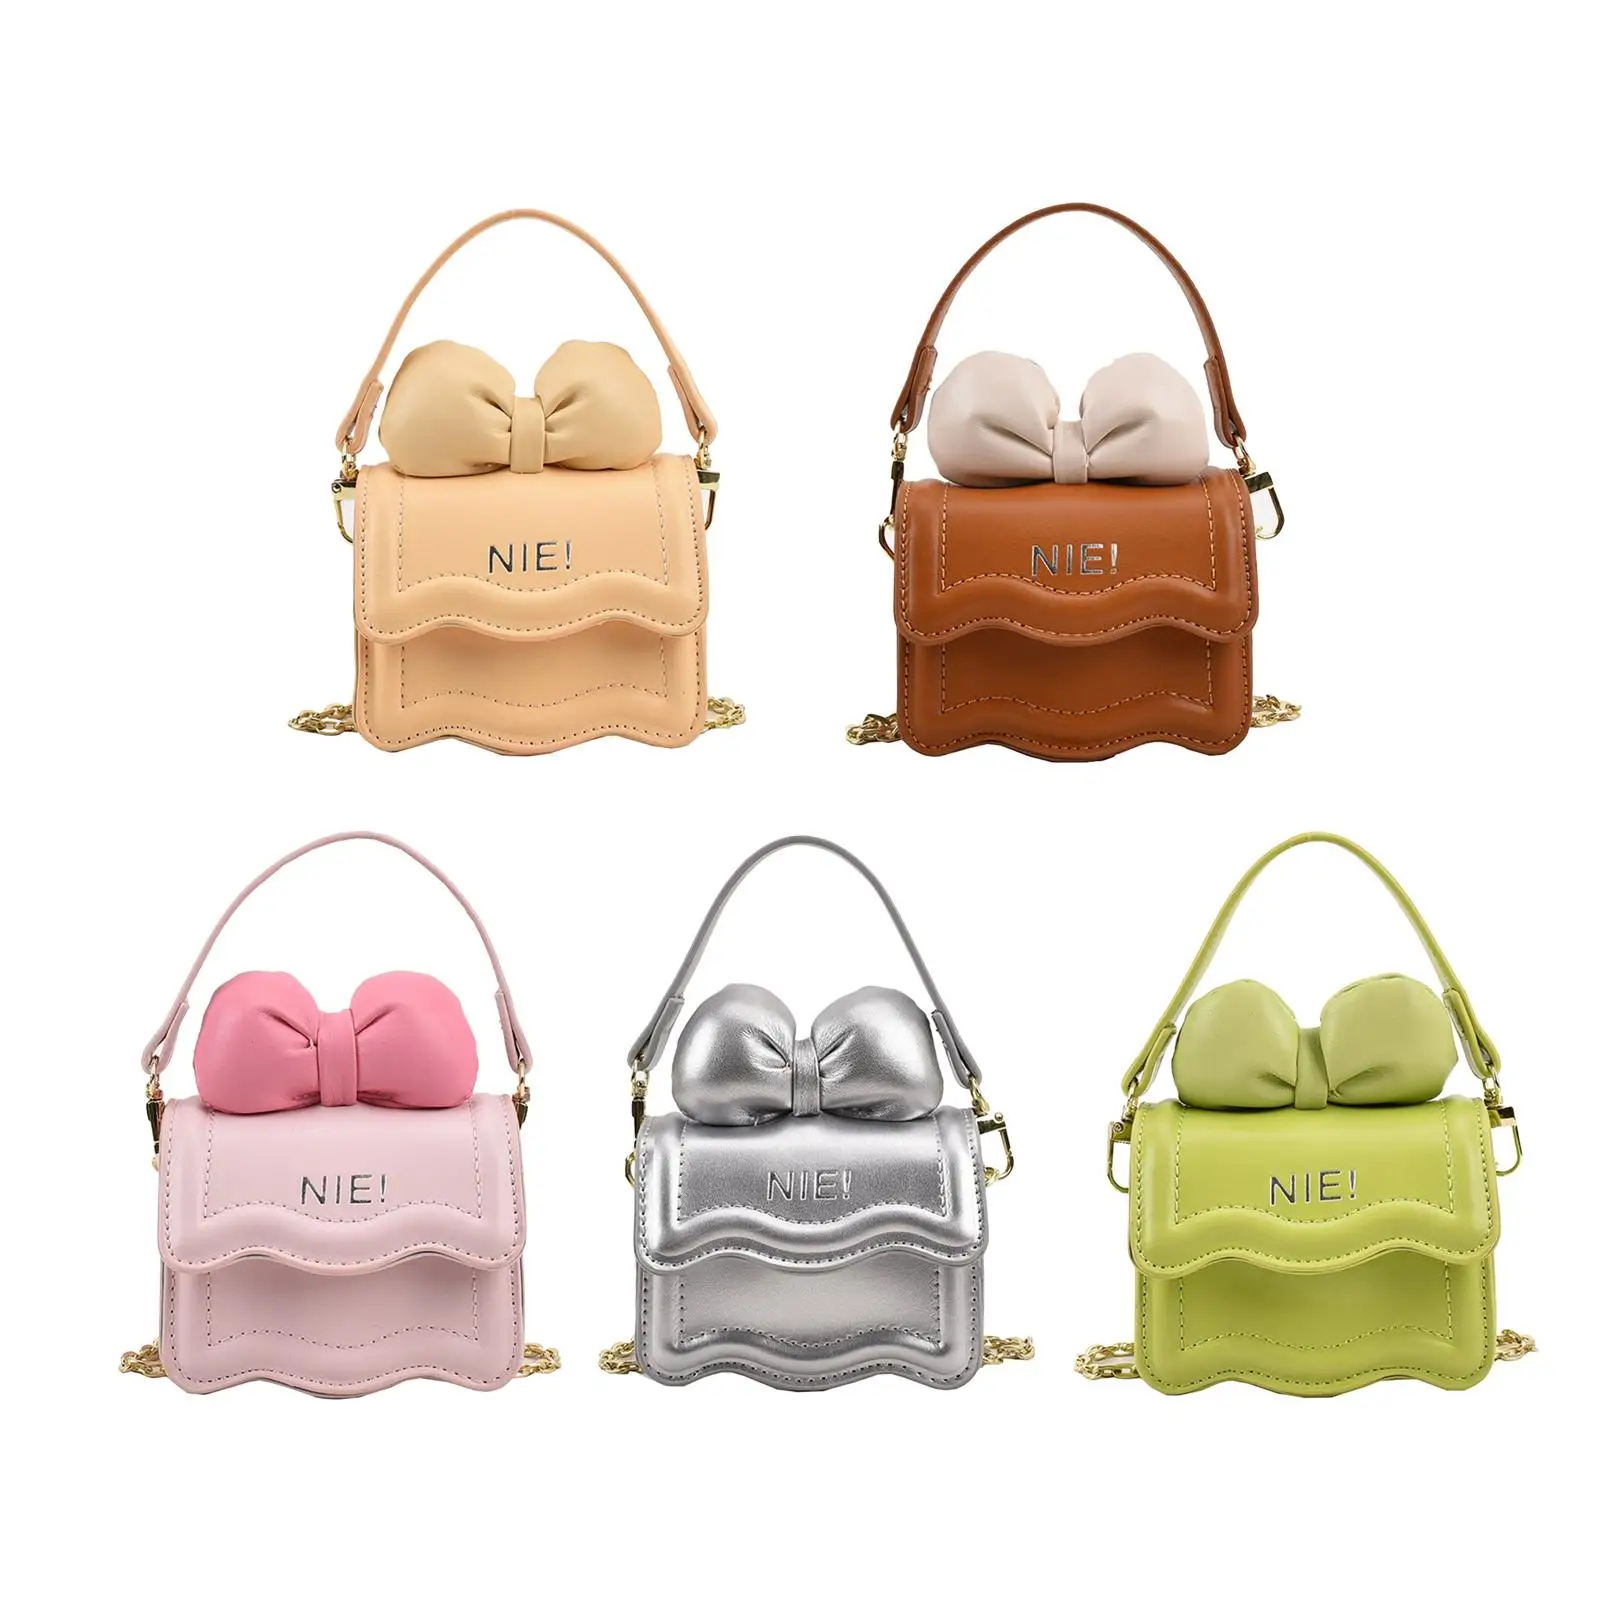 Women Shoulder Bag Chic Lightweight Pouch Gift Casual Ladies Handbag Mini Chain Bag for Traveling Spring Summer Outdoor Vacation